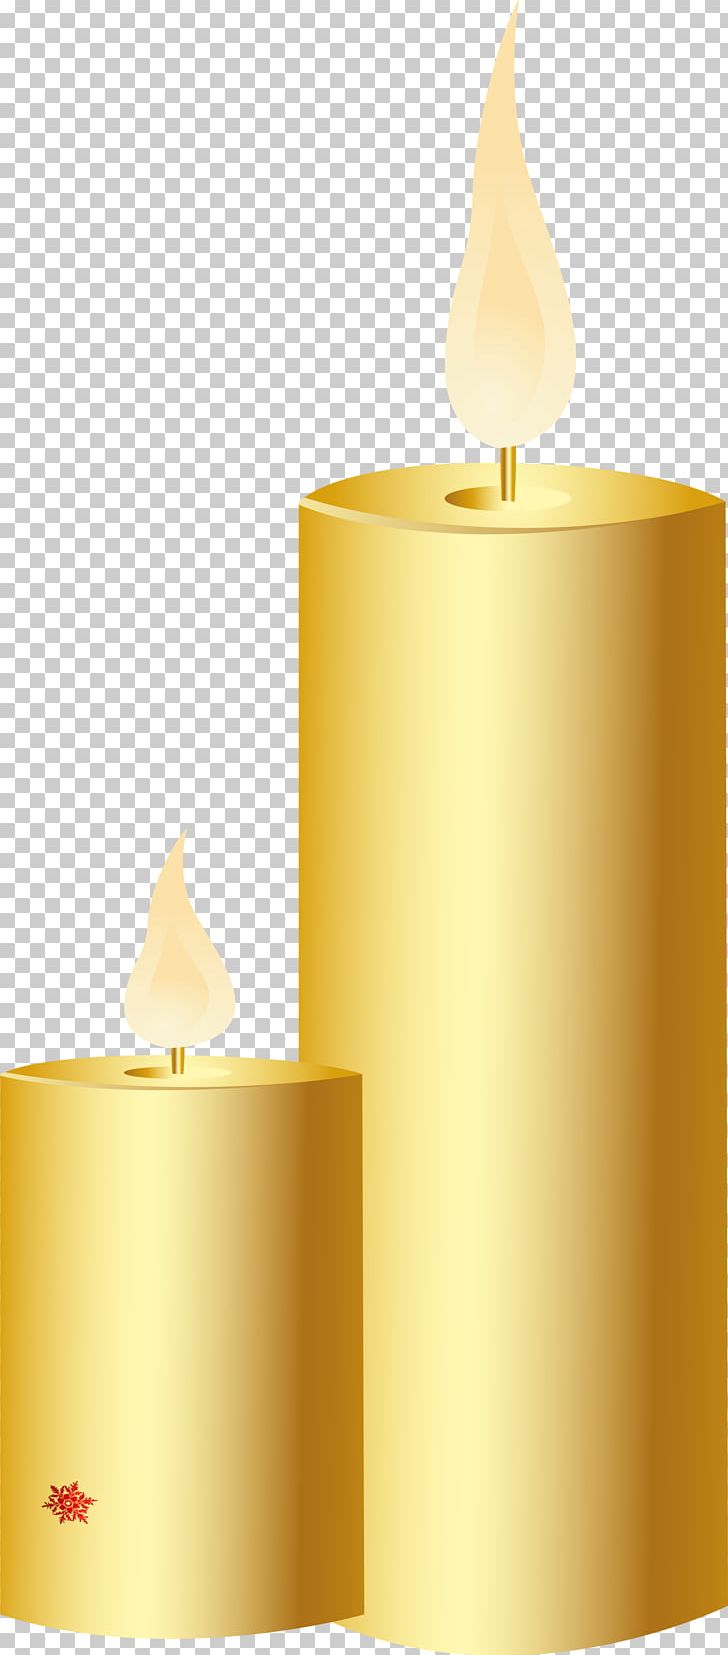 Candle Light Yellow PNG, Clipart, Candle, Candlelight, Candles, Candlestick, Cartoon Free PNG Download